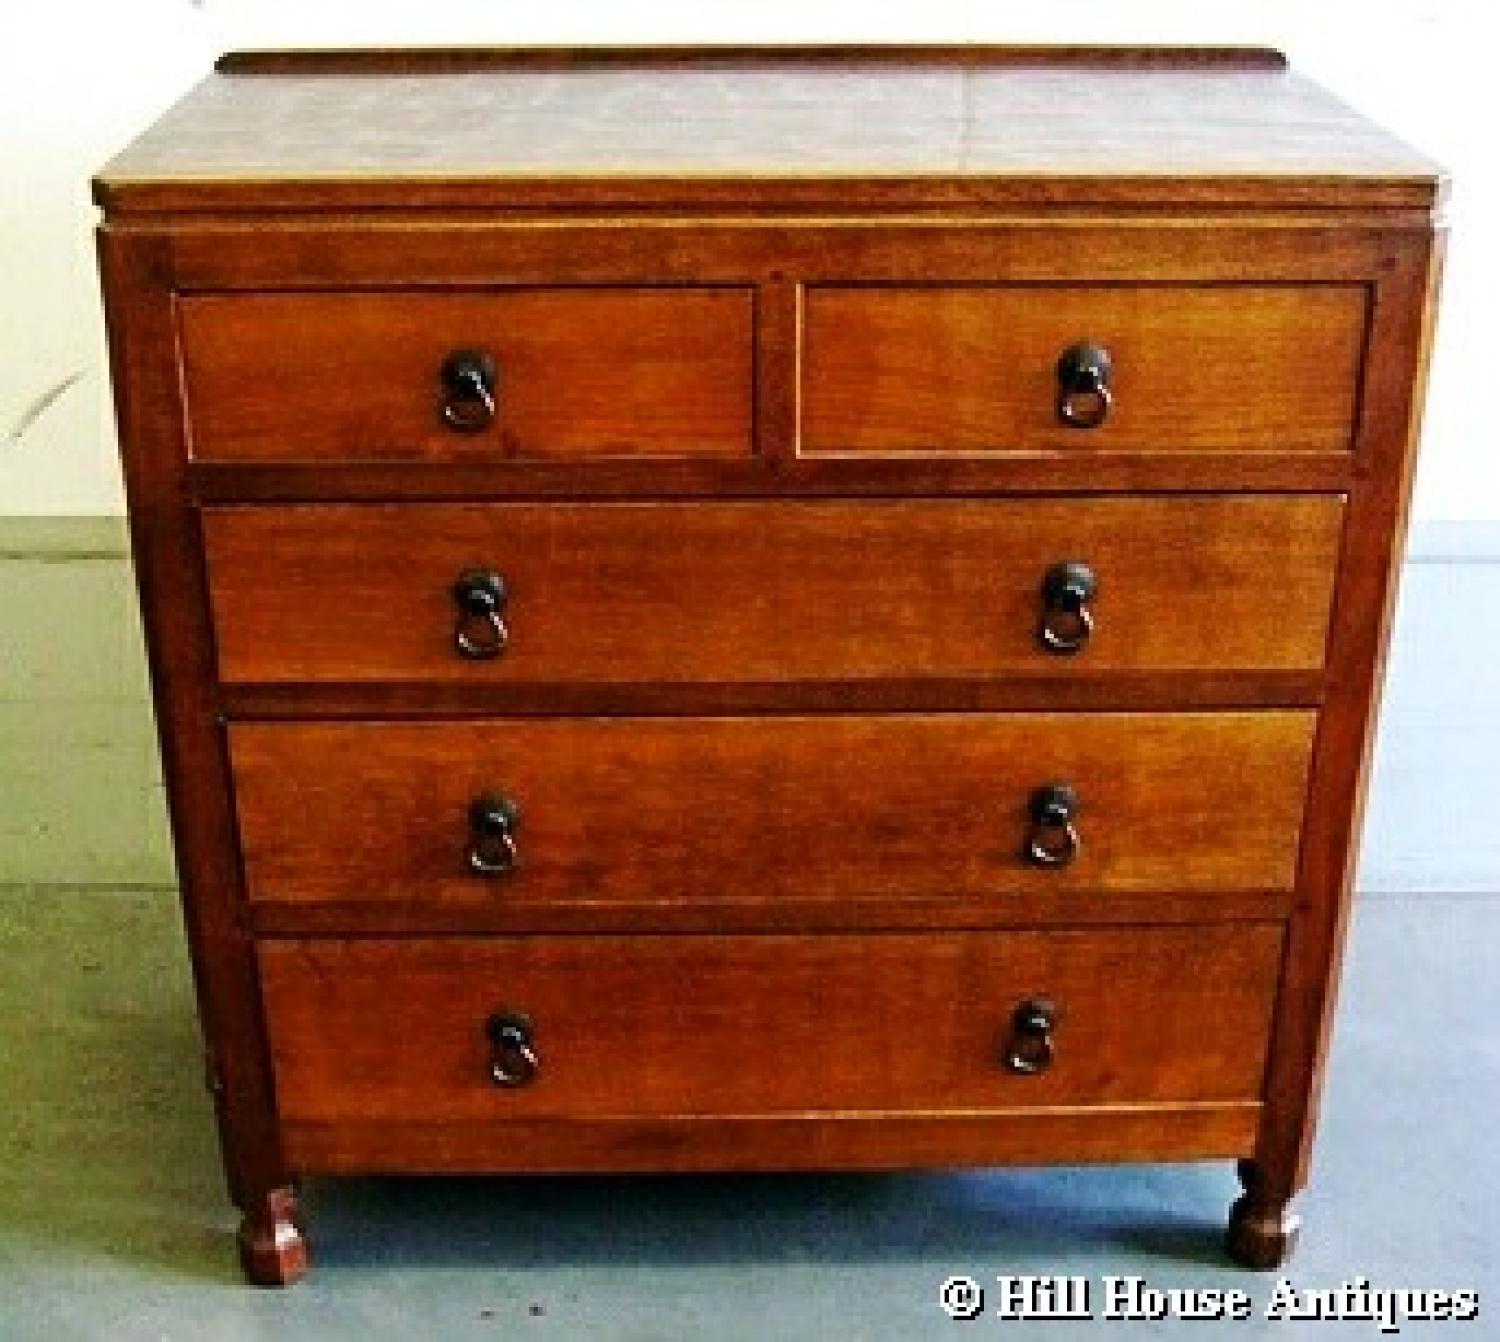 Rare early Mouseman chest of drawers